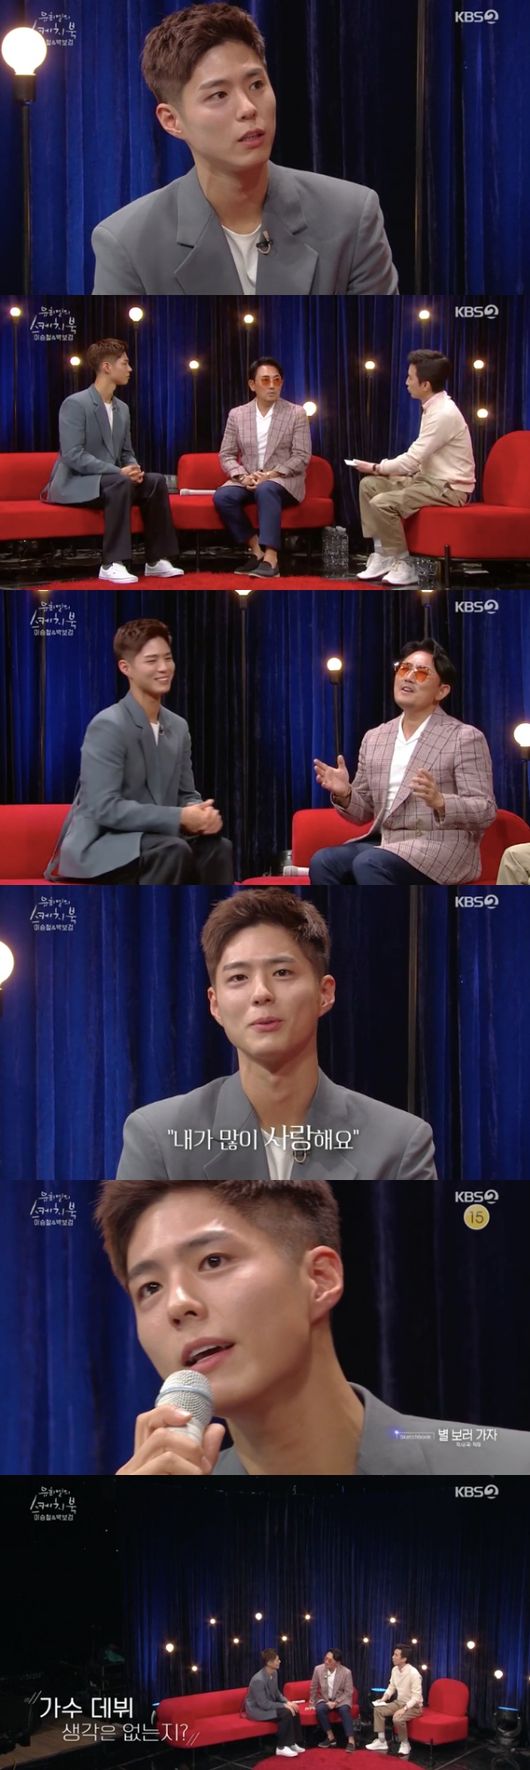 I was soaked in the charm of actor Park Bo-gum, who showed me not only the performance but also the acting and piano playing, making people who were together.Park Bo-gum appeared on KBS 2TV You Hee-yeols Sketchbook (You Hee-yeols Sketchbook), which aired on the 20th.Actor Park Bo-gum appeared with Lee Seung-cheol to create a beautiful stage.Park Bo-gum performed the piano to Lee Seung-cheols song I Love You a lotLove Live!!Park Bo-gum, who showed a performance that was suspiciously perfected for AR, showed a room to show himself that he made a mistake at the end and showed himself Love Live!Park Bo-gum showed not only piano but also singing singing ability by singing Lets go to the stars in the advertisement.You Hee-yeol and Lee Seung-cheol were also unexpected singing skills to praise.After Park Bo-gums performance, there was effort: Hwang Min-gyu PD, who directed You Hee-yeols Sketchbook, said, PlayLove Live!!Lee Seung-cheol and Park Bo-gum were in the process of breathing for less than a week after hearing about their backs. We were very grateful for the short preparation period and for making us perform.Park Bo-gum, who practiced faithfully in a short practice time, also performed Paul Manafort.Hwang PD explained, He was faithful to the stage, Paul Manafort was good and caring, and he was really right, and he kept remembering it.Lee Seung-cheol, who set the stage with Park Bo-gum, also left a touching impression after the broadcast of You Hee-yeols Sketchbook.Lee Seung-cheol expressed his gratitude to Park Bo-gum in an article entitled The Joke-True Dream #Colabo #PerfectionHanmubi protagonist #Sinterklaasgadar #YouHee-Yeols Sketchbook.Park Bo-gum finished filming the movie Seobok with sharing after tvN Boyfriend. However, he did not appear on the air and raised many fans questions.Park Bo-gum will be looking for viewers again with acting after showing his side as a singer in You Hee-yeols Sketchbook.Park Bo-gum will appear in the final episode of Itaewon Clath in connection with Kim Sung-yoon PD, who directed Gurmigreen Moonlight, and will shine the end of the drama.In addition to his special appearance, he also confirmed his appearance in the new film Youth Record by Ahn Gil-ho PD and Ha Myung-hee. Park Bo-gum will play Sa Hye-joon, who turns from model to actor.Park Bo-gum, Park So-dam and Byun Woo-suk are together.Park Bo-gums magic, which makes everyone who meets, was also demonstrated in You Hee-yeols Sketchbook.Park Bo-gums future activities also have a lot of expectations